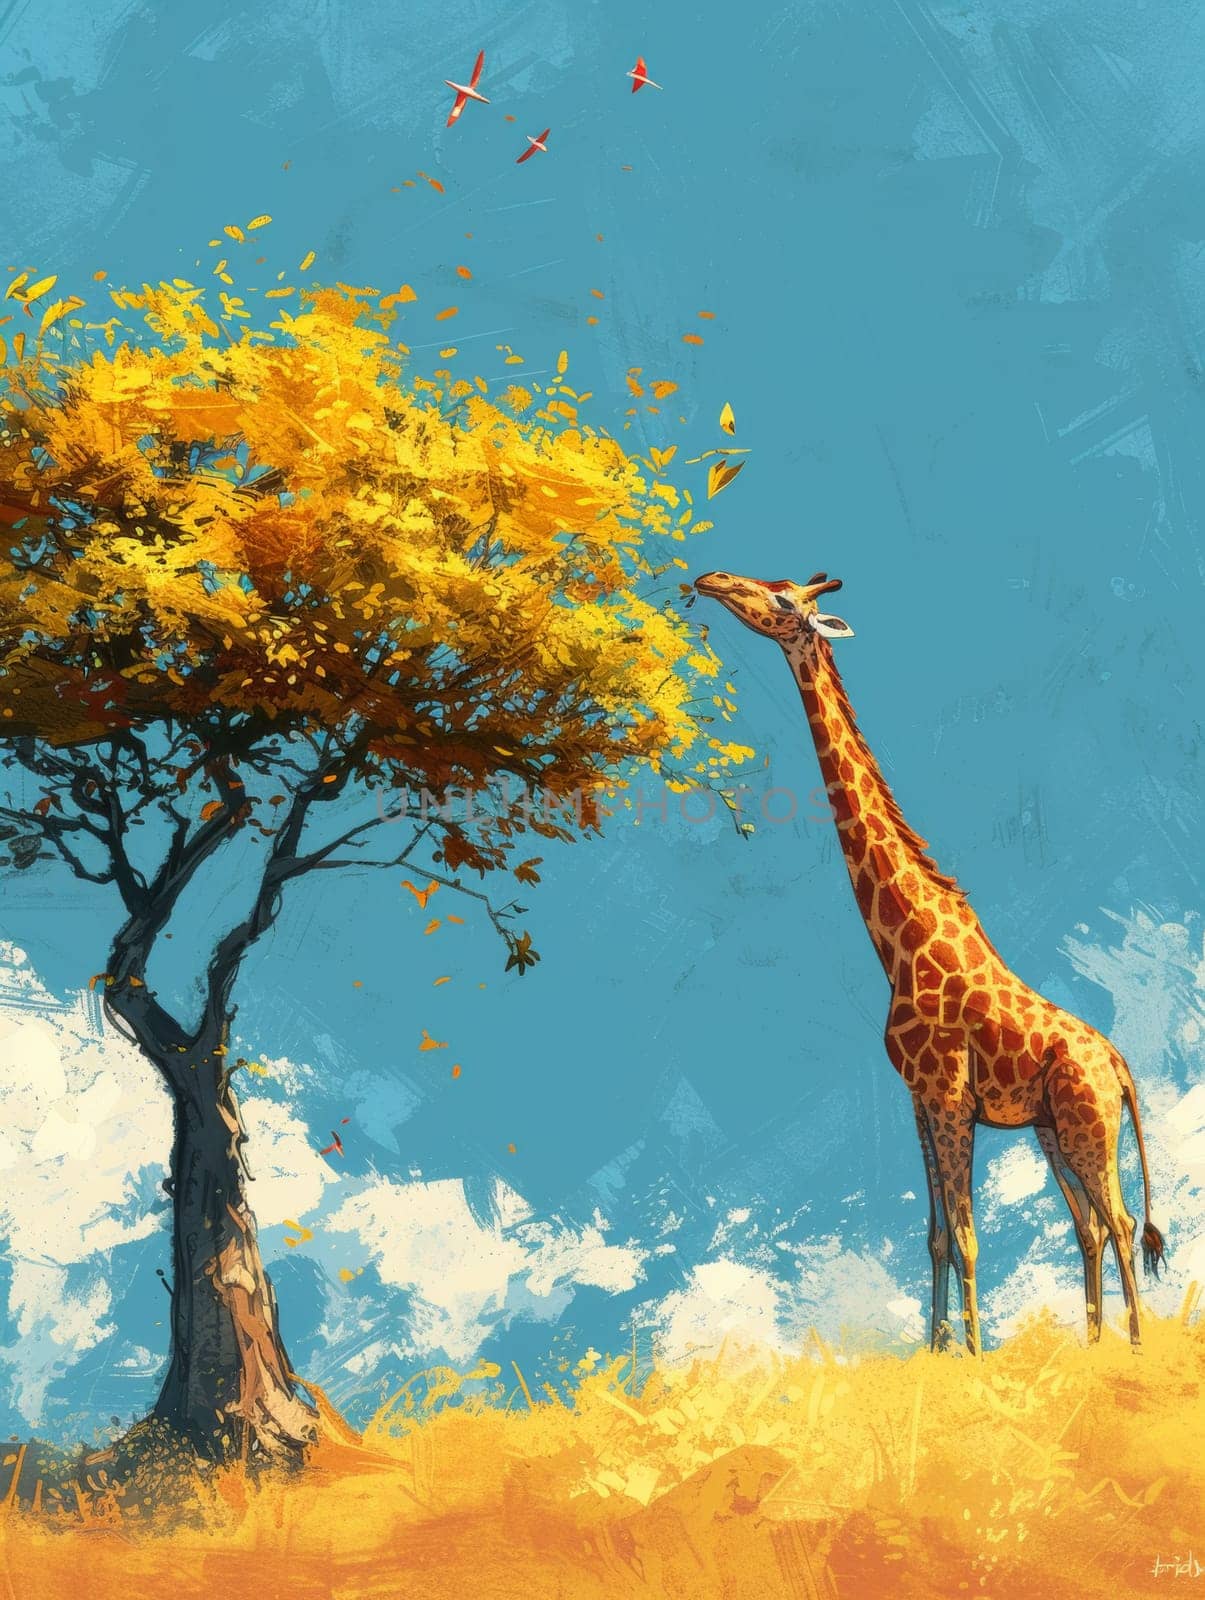 A giraffe standing next to a tree with leaves on it